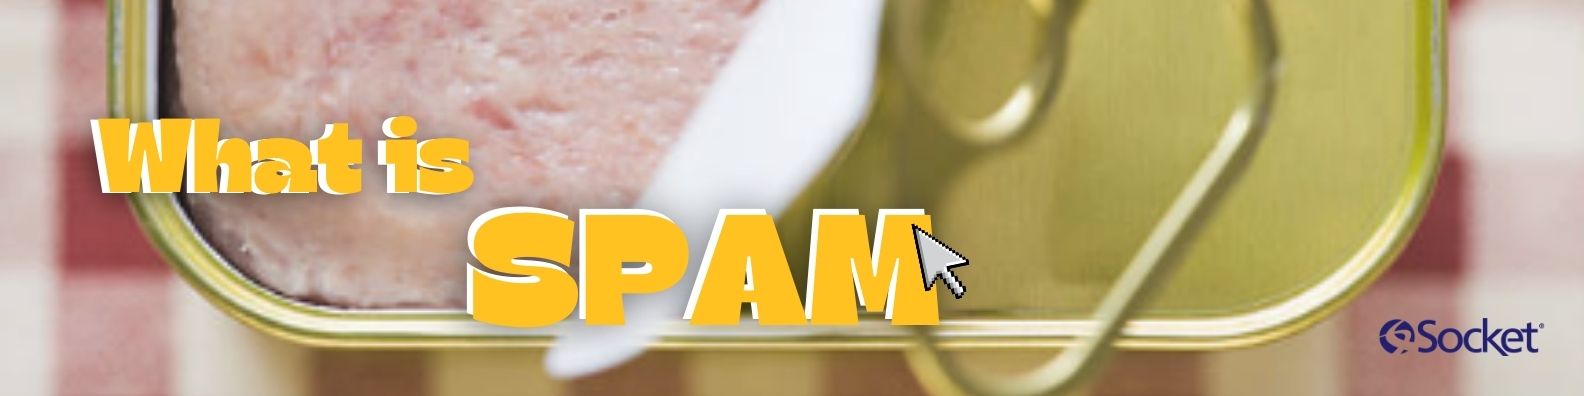 top view of a half open can of span with text reading "what is spam." There is a mouse clicker hovering over the "M" in spam because the article is about spam emails